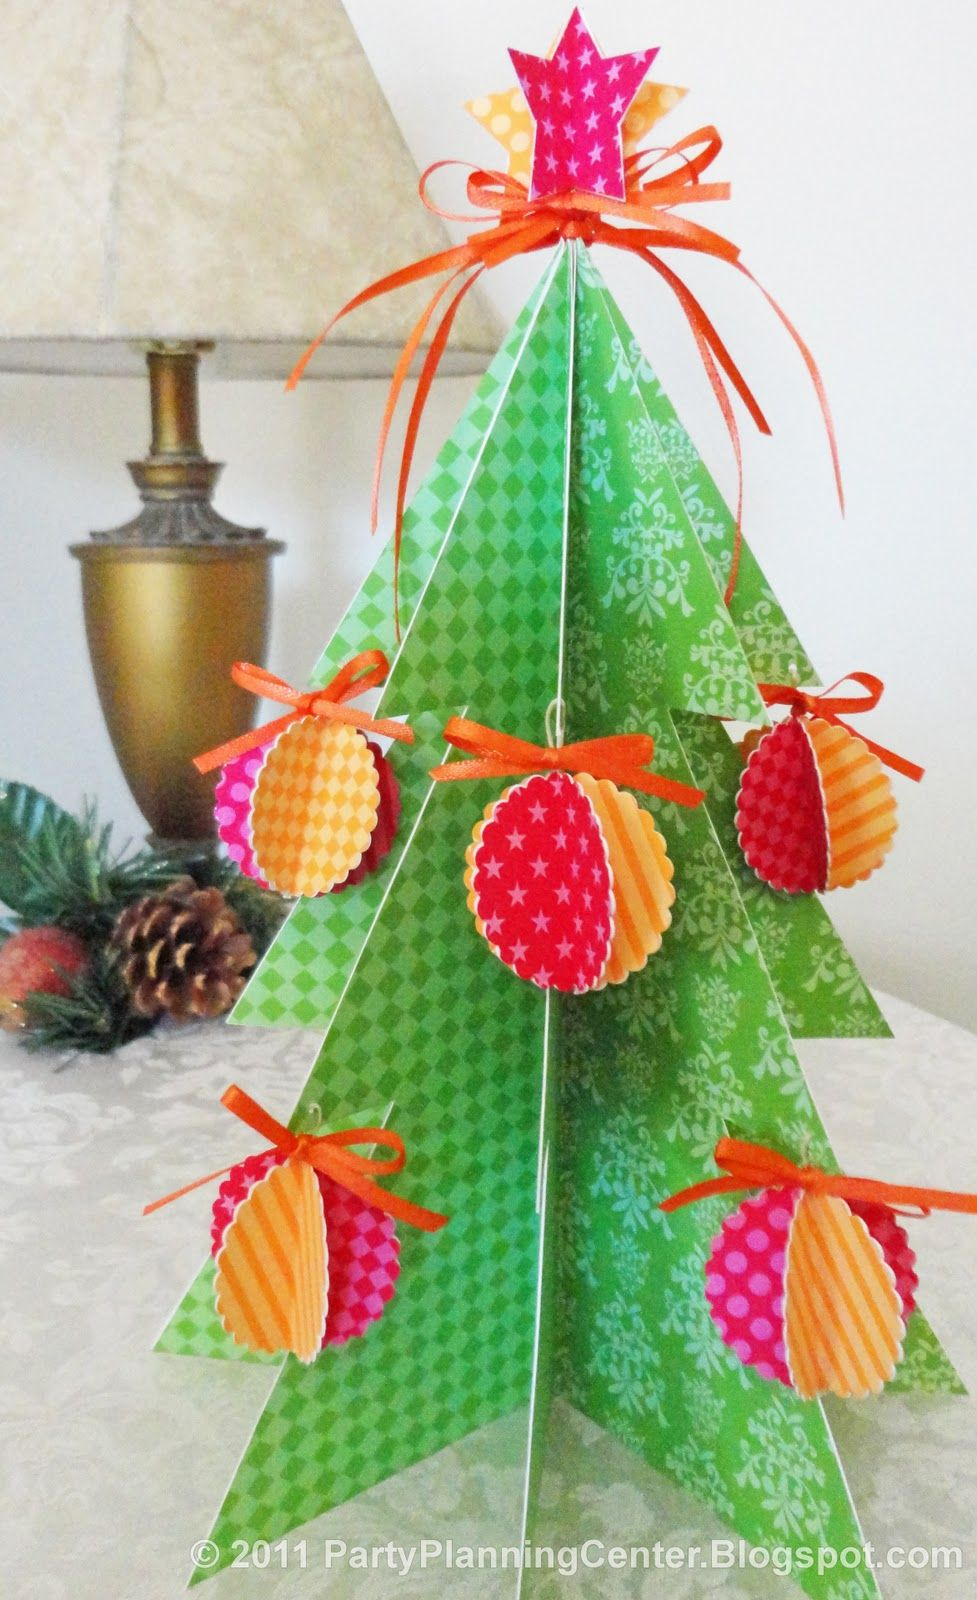 Party Planning Center: Free Printable Paper Christmas Tree And - Free Printable Christmas Ornament Crafts